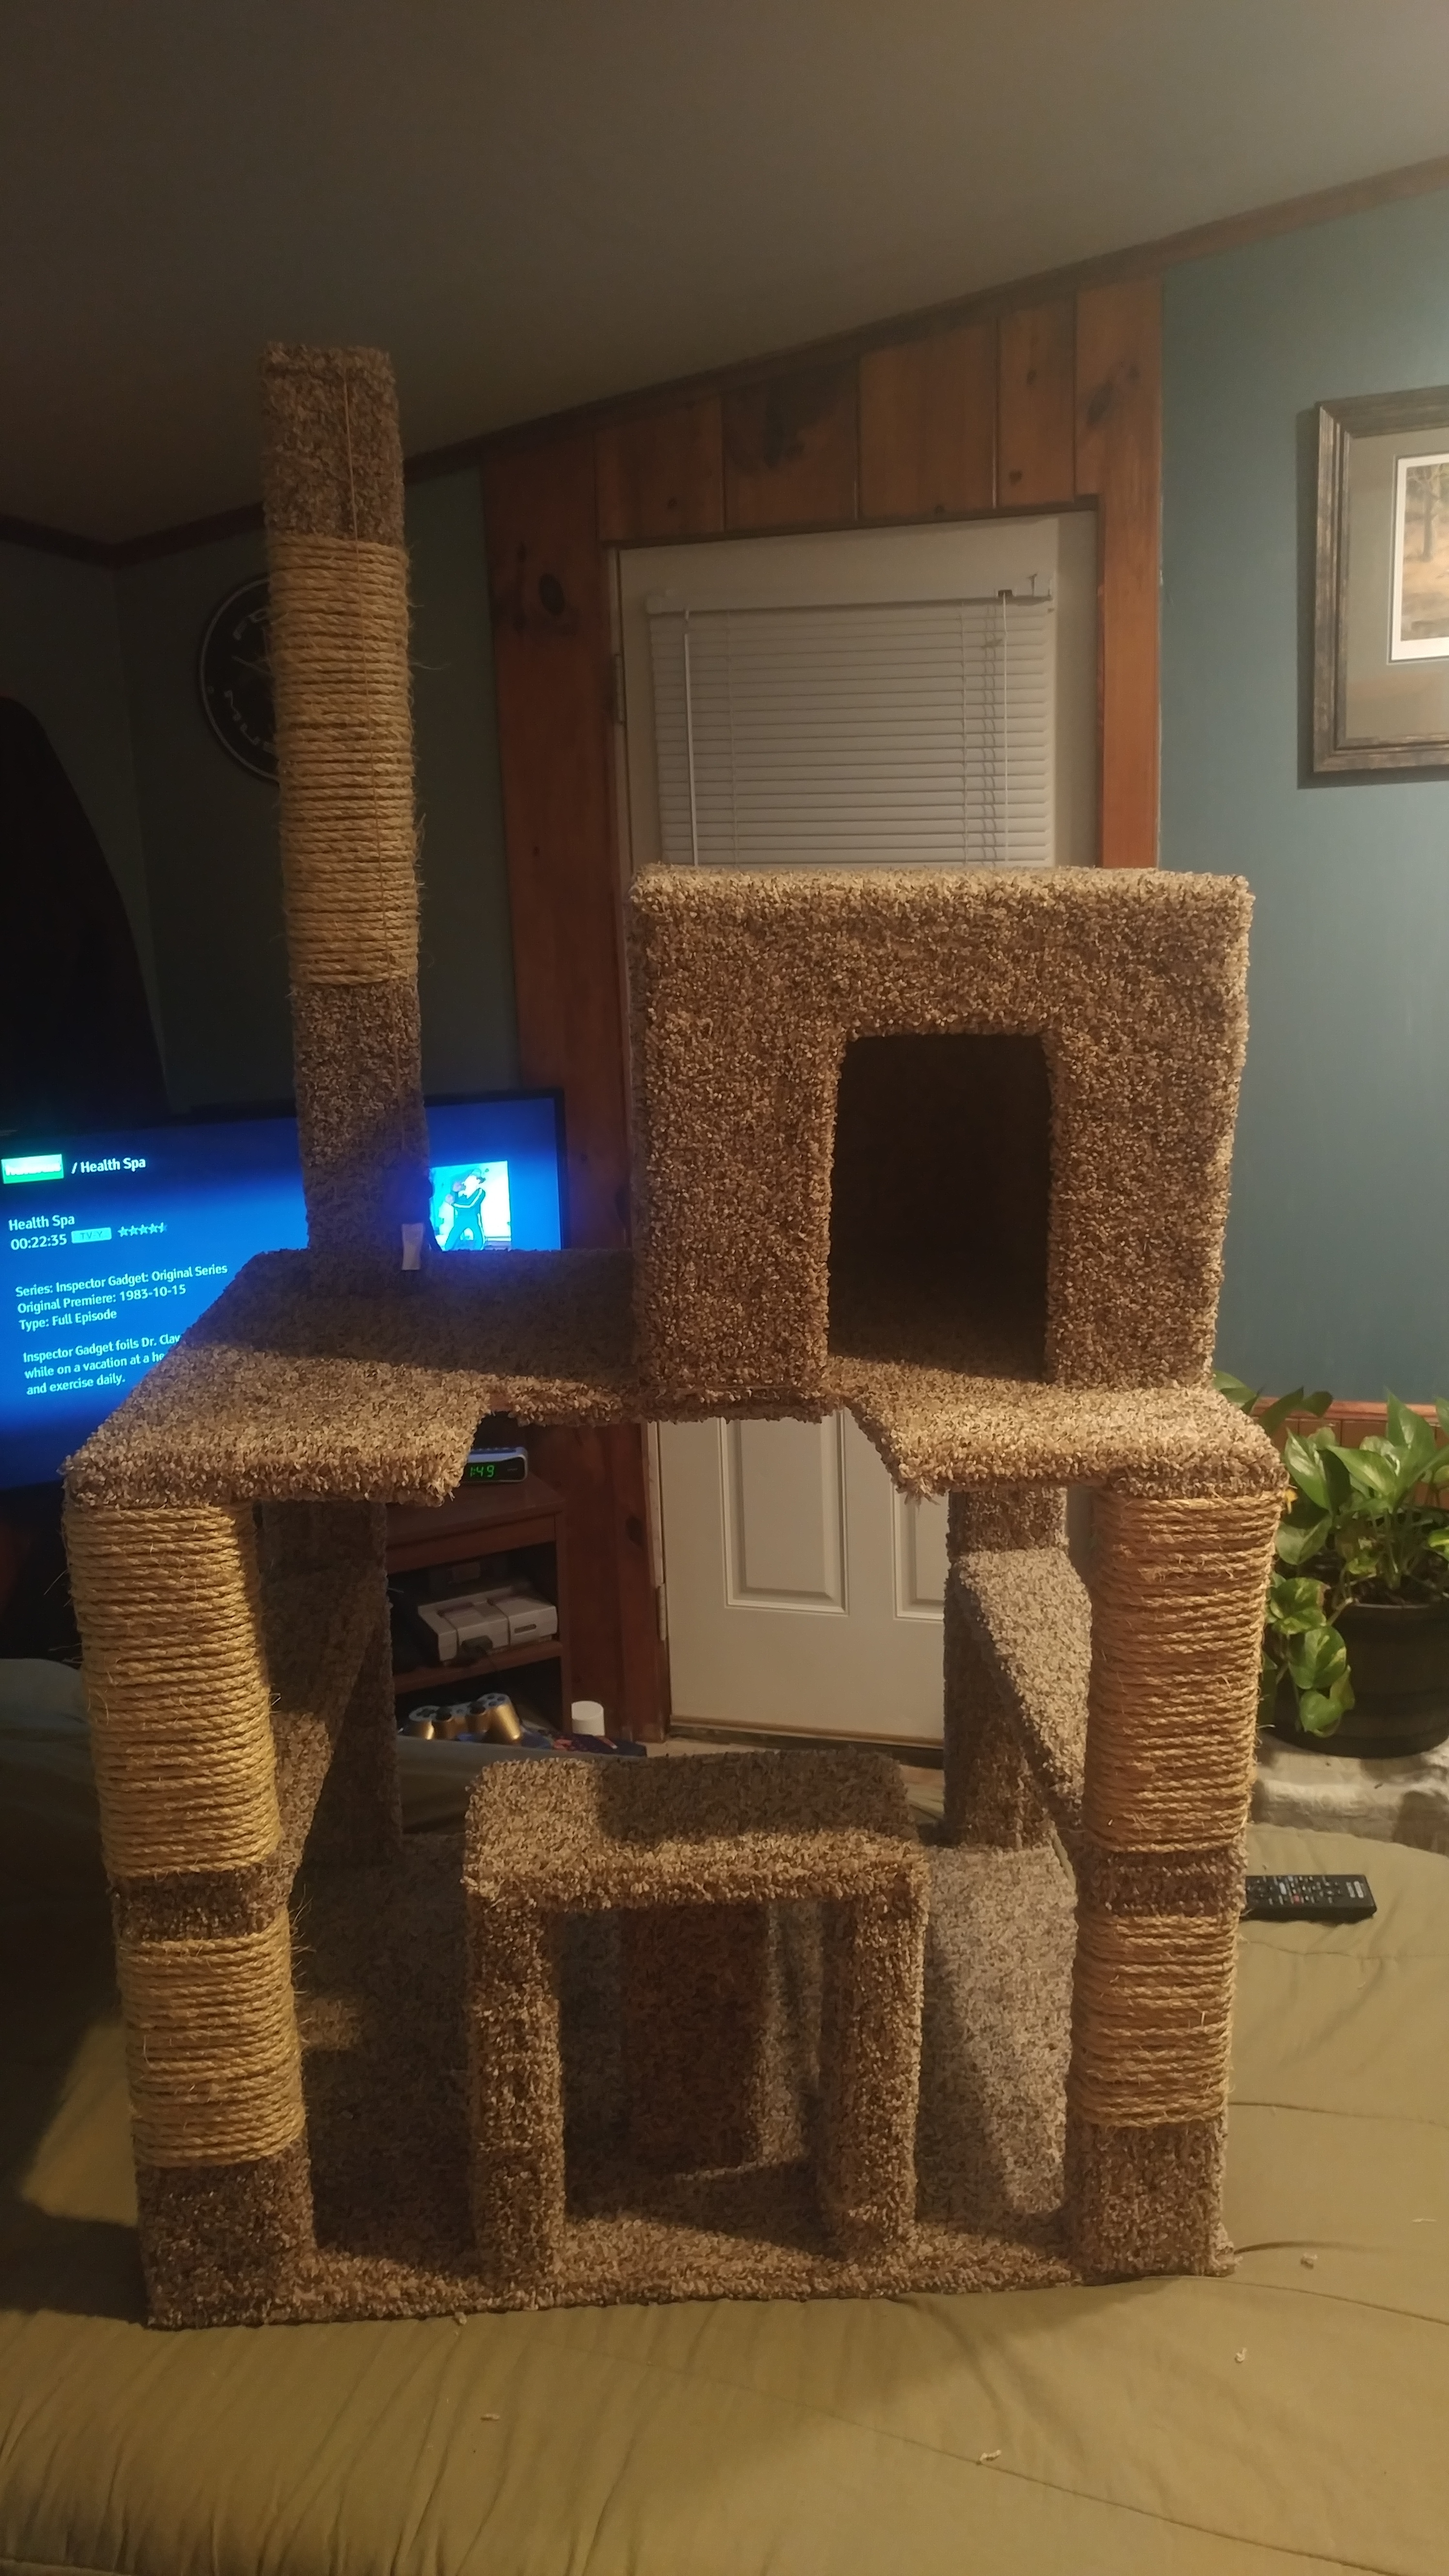 Cat tower - RYOBI Nation Projects2988 x 5312